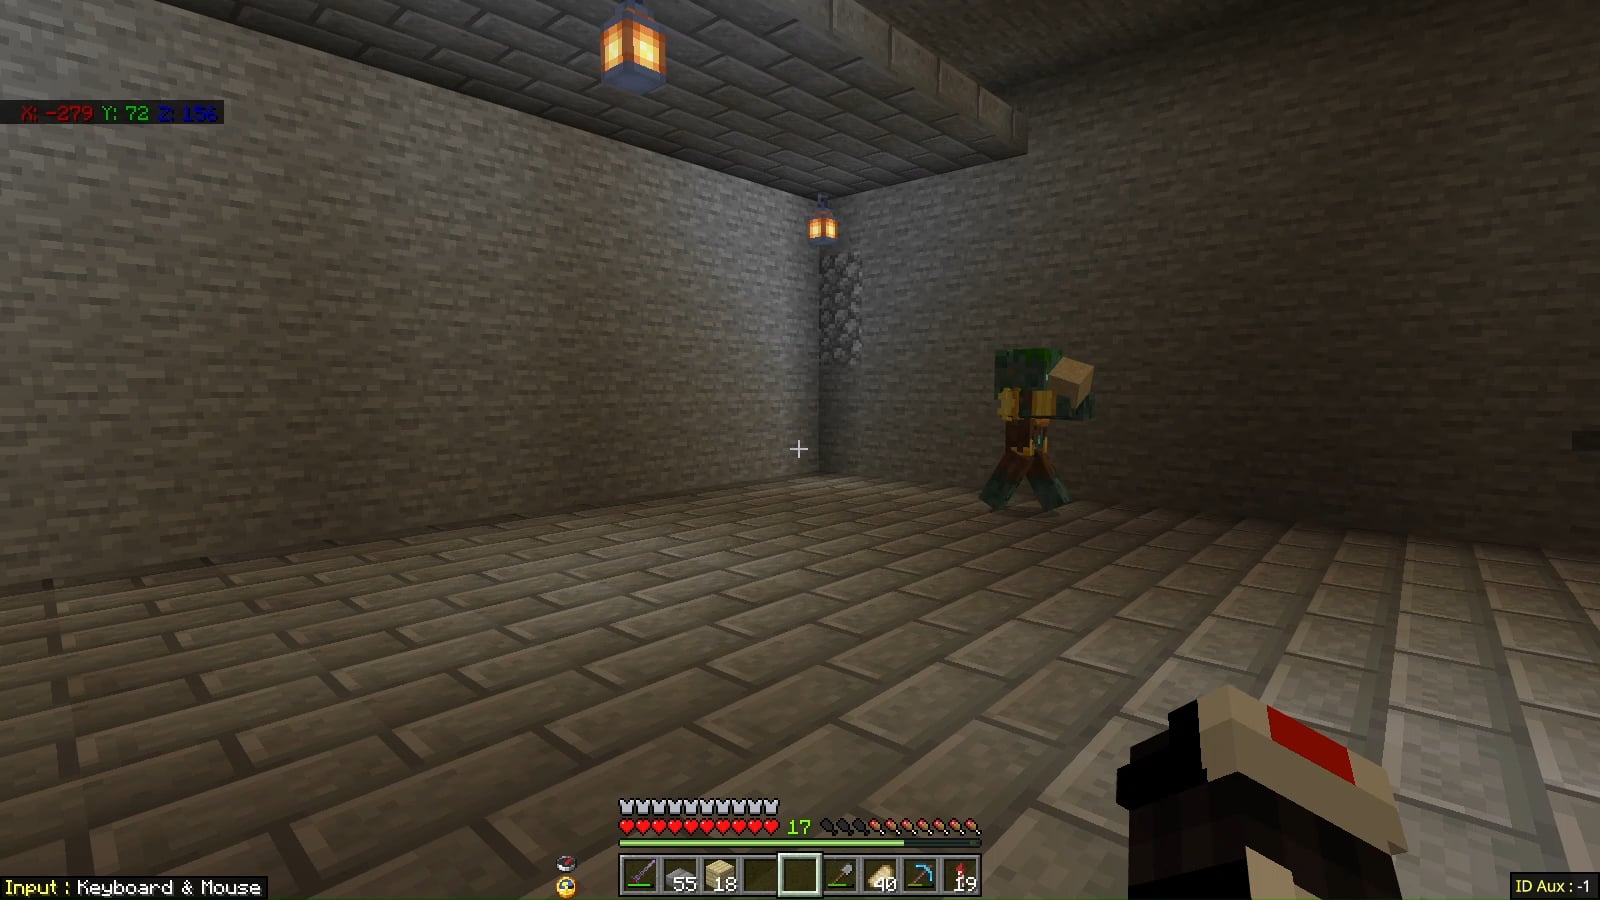 Minecraft Memes - "From enemy to pet: Drowned in my anti-explosion room is now my BFF, say hello to Kiki XD"